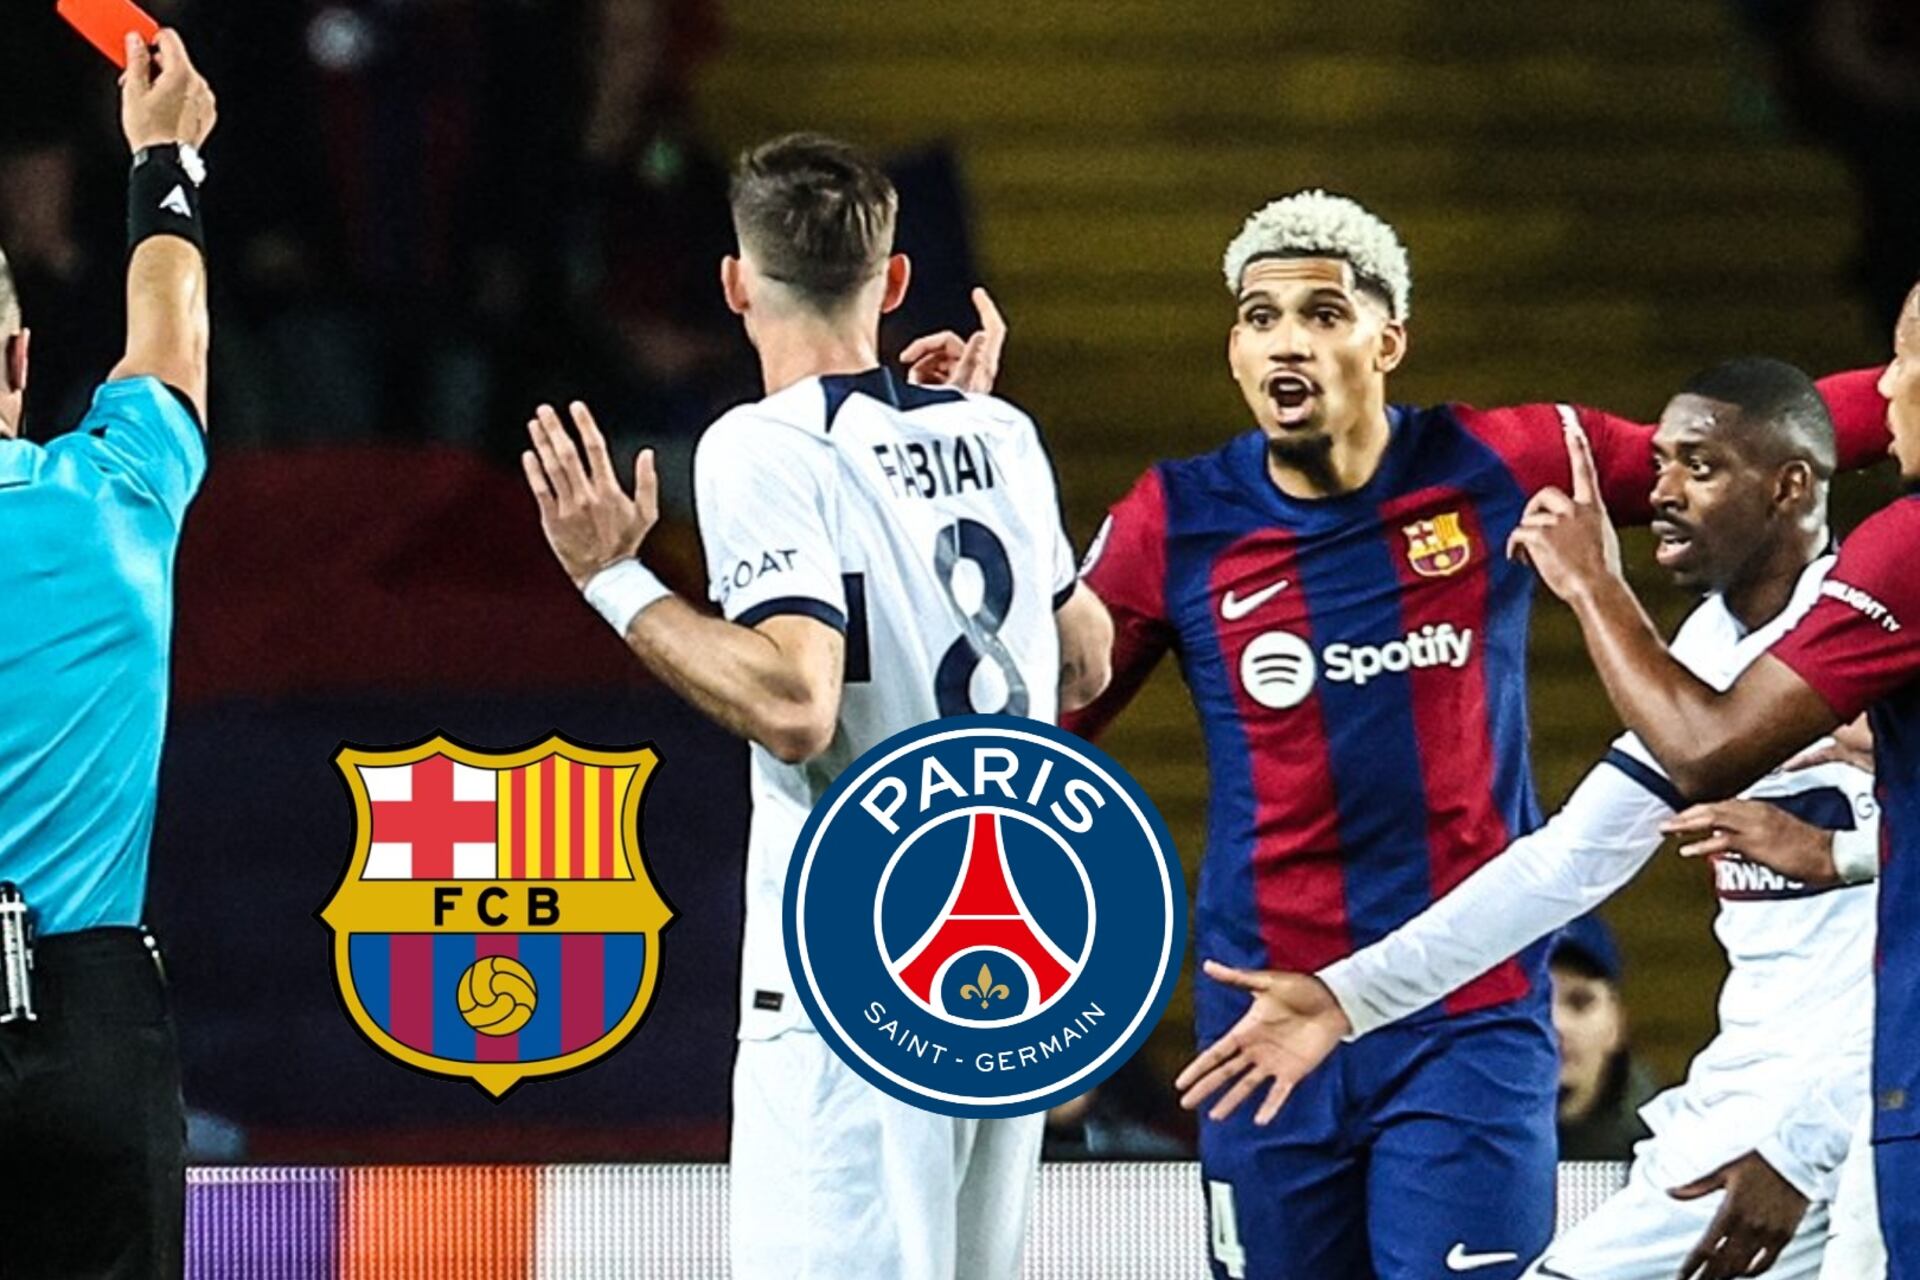 (VIDEO) He lost his mind, got a red card and the polemic gesture Araujo did after been sent off in Barcelona vs PSG